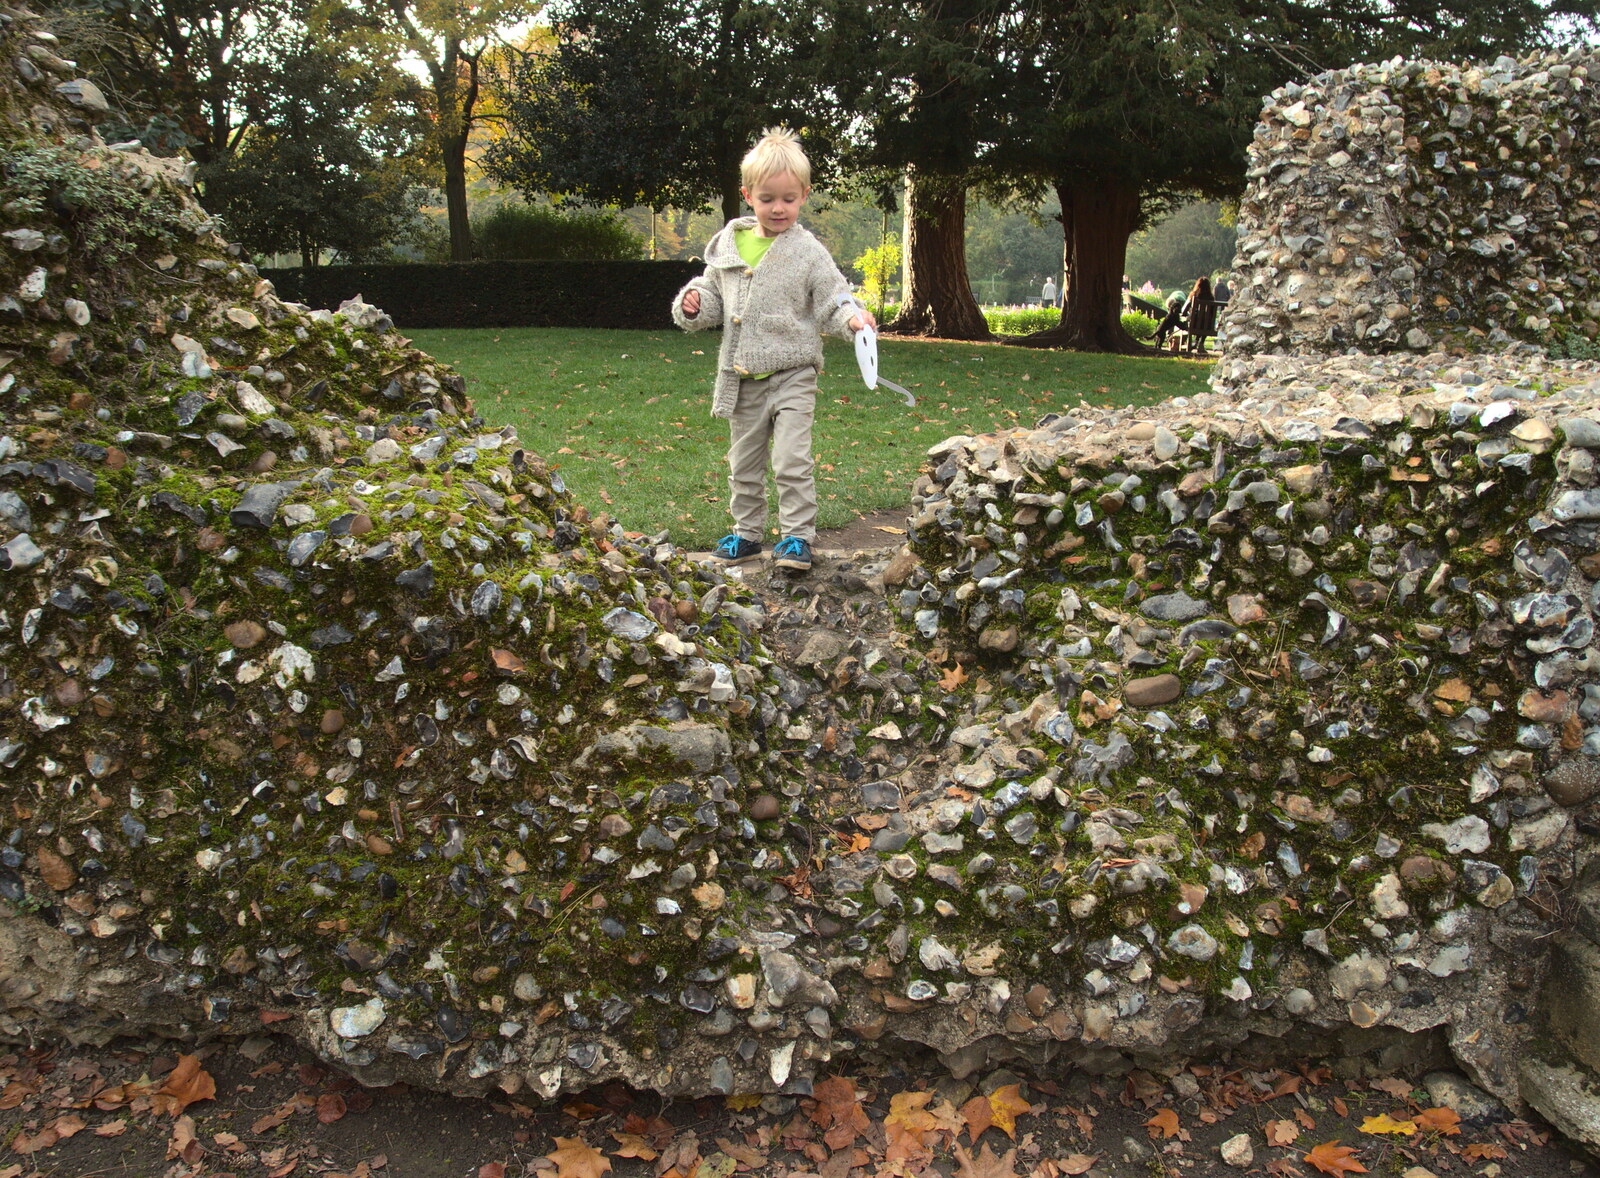 Harry on a wall from Abbey Gardens in Autumn, Bury St. Edmunds, Suffolk - 27th October 2015